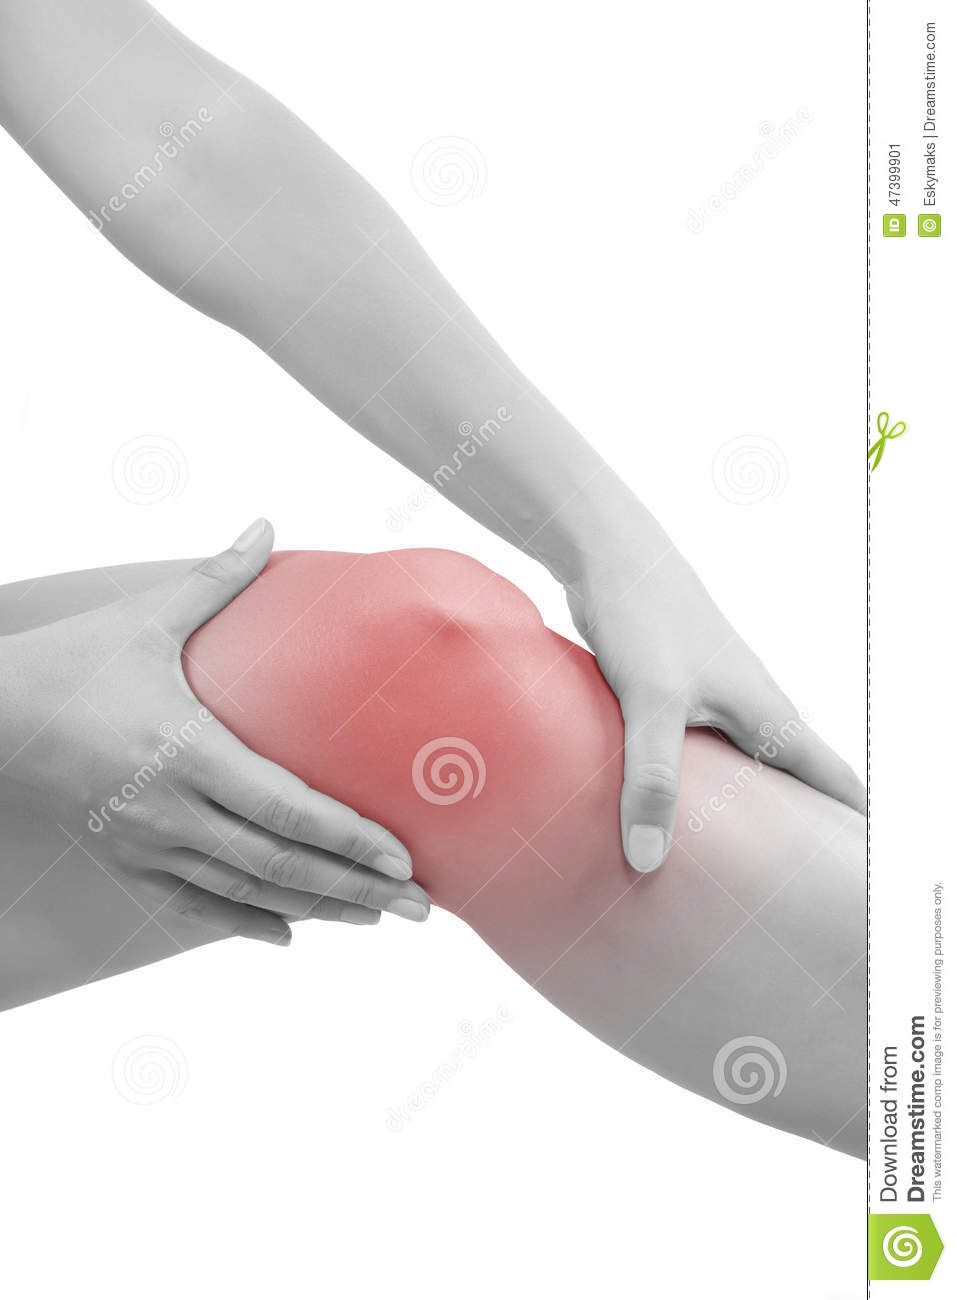 Knee Injury  Woman Holding Her Knee With Highlighted Pain Area